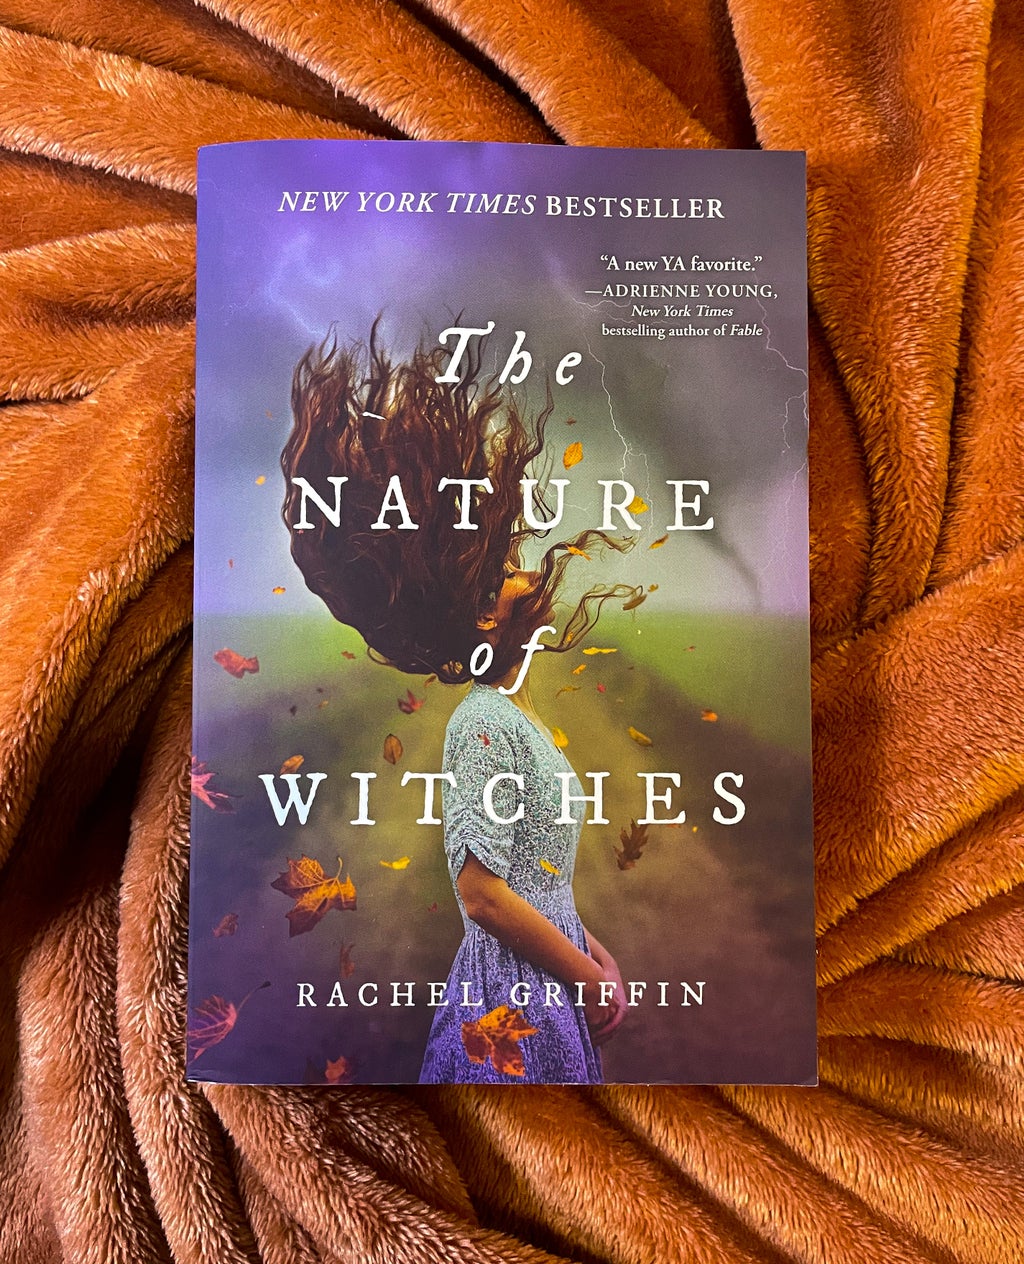 The Nature of Witches by Rachel Griffin on orange blanket